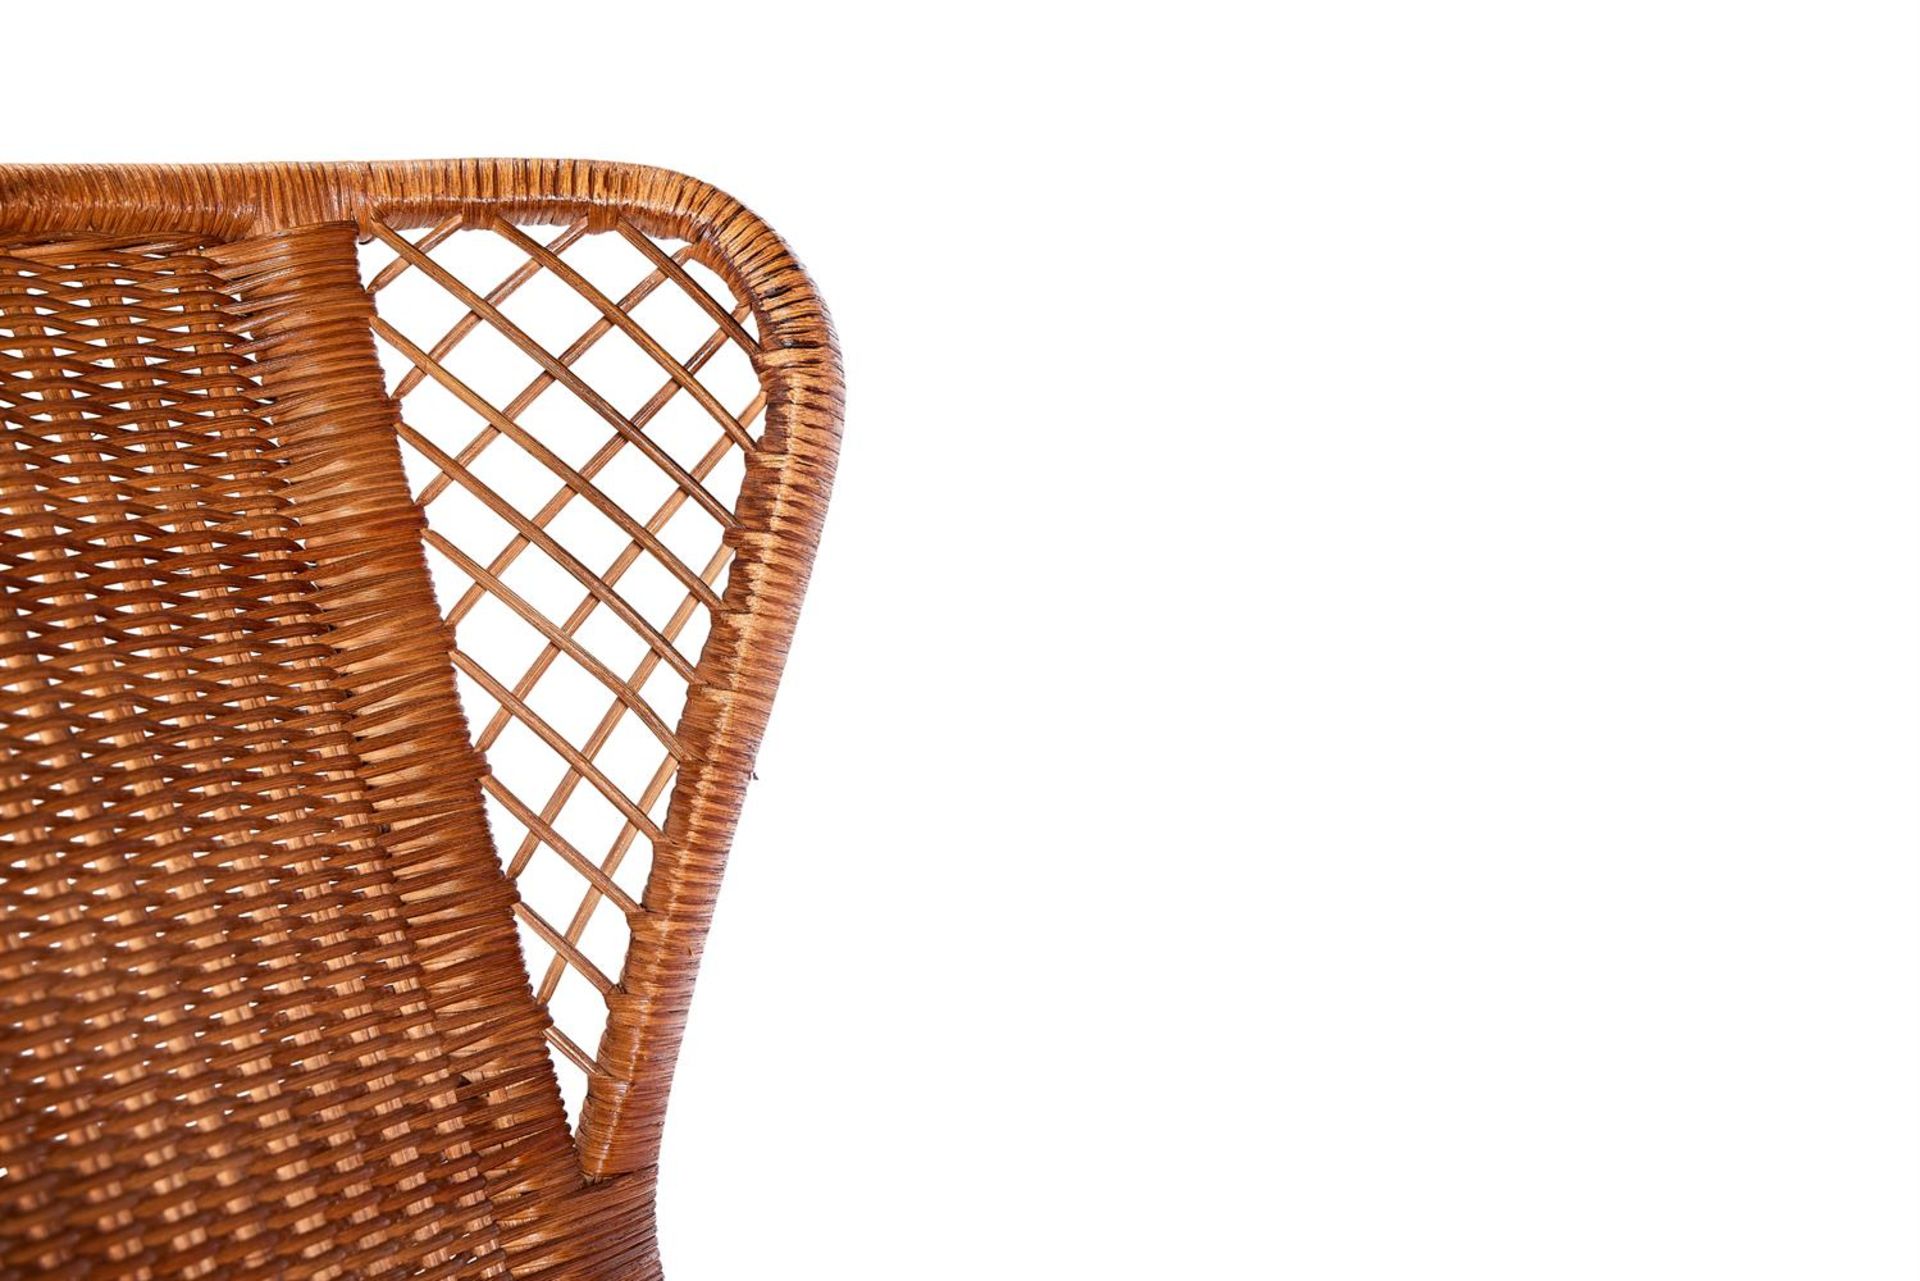 A SET OF FOUR RATTAN OPEN ARMCHAIRS ATTRIBUTED TO EUGENIA ALBERTO REGGIO MANUFACTURED BY CICERI - Image 4 of 4